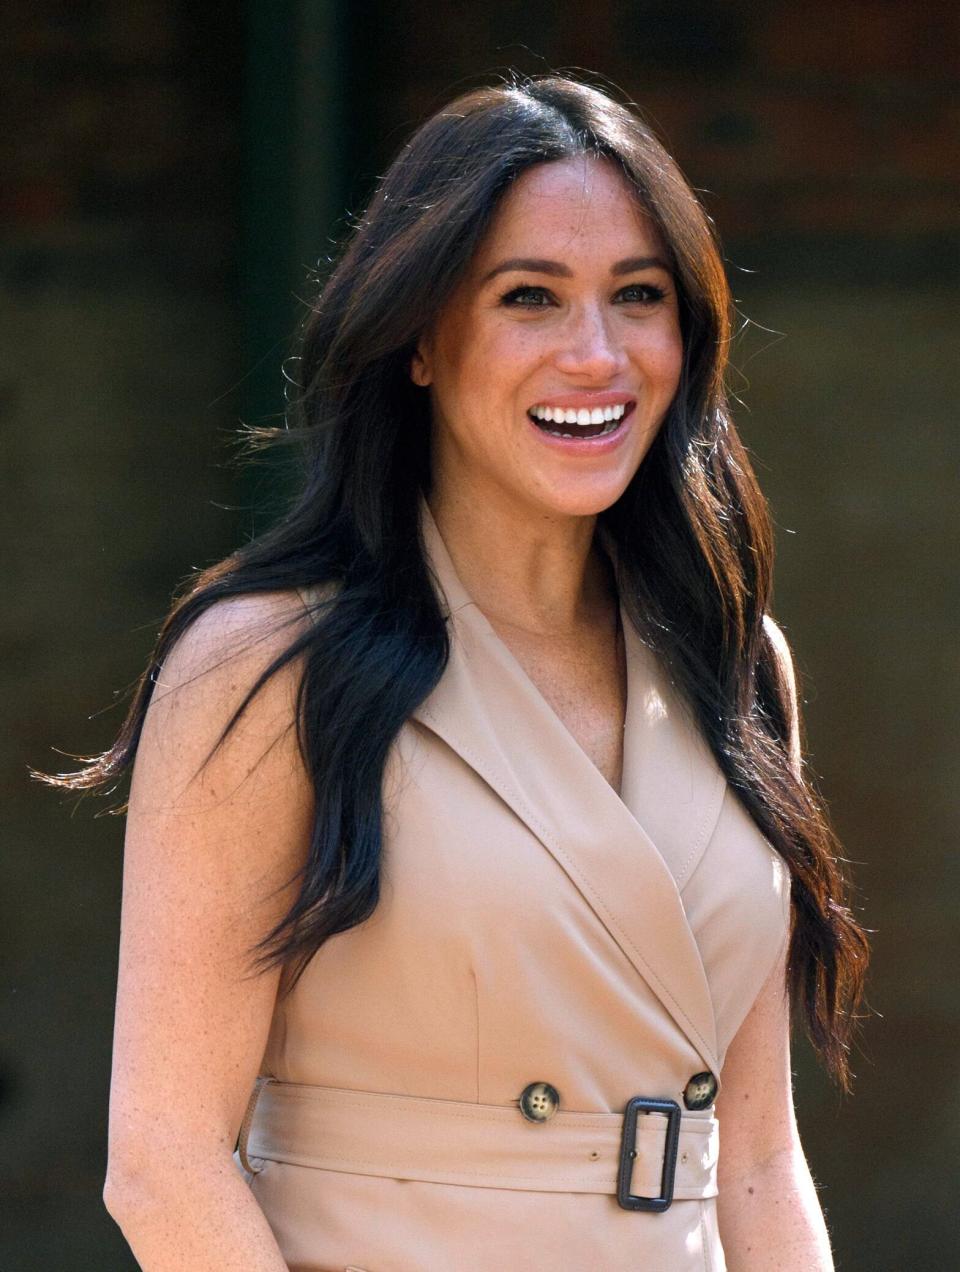 The Duchess of Sussex, patron of the Association of Commonwealth Universities, visits the University of Johannesburg in South Africa on Oct. 1. (Photo: Pool via Getty Images)